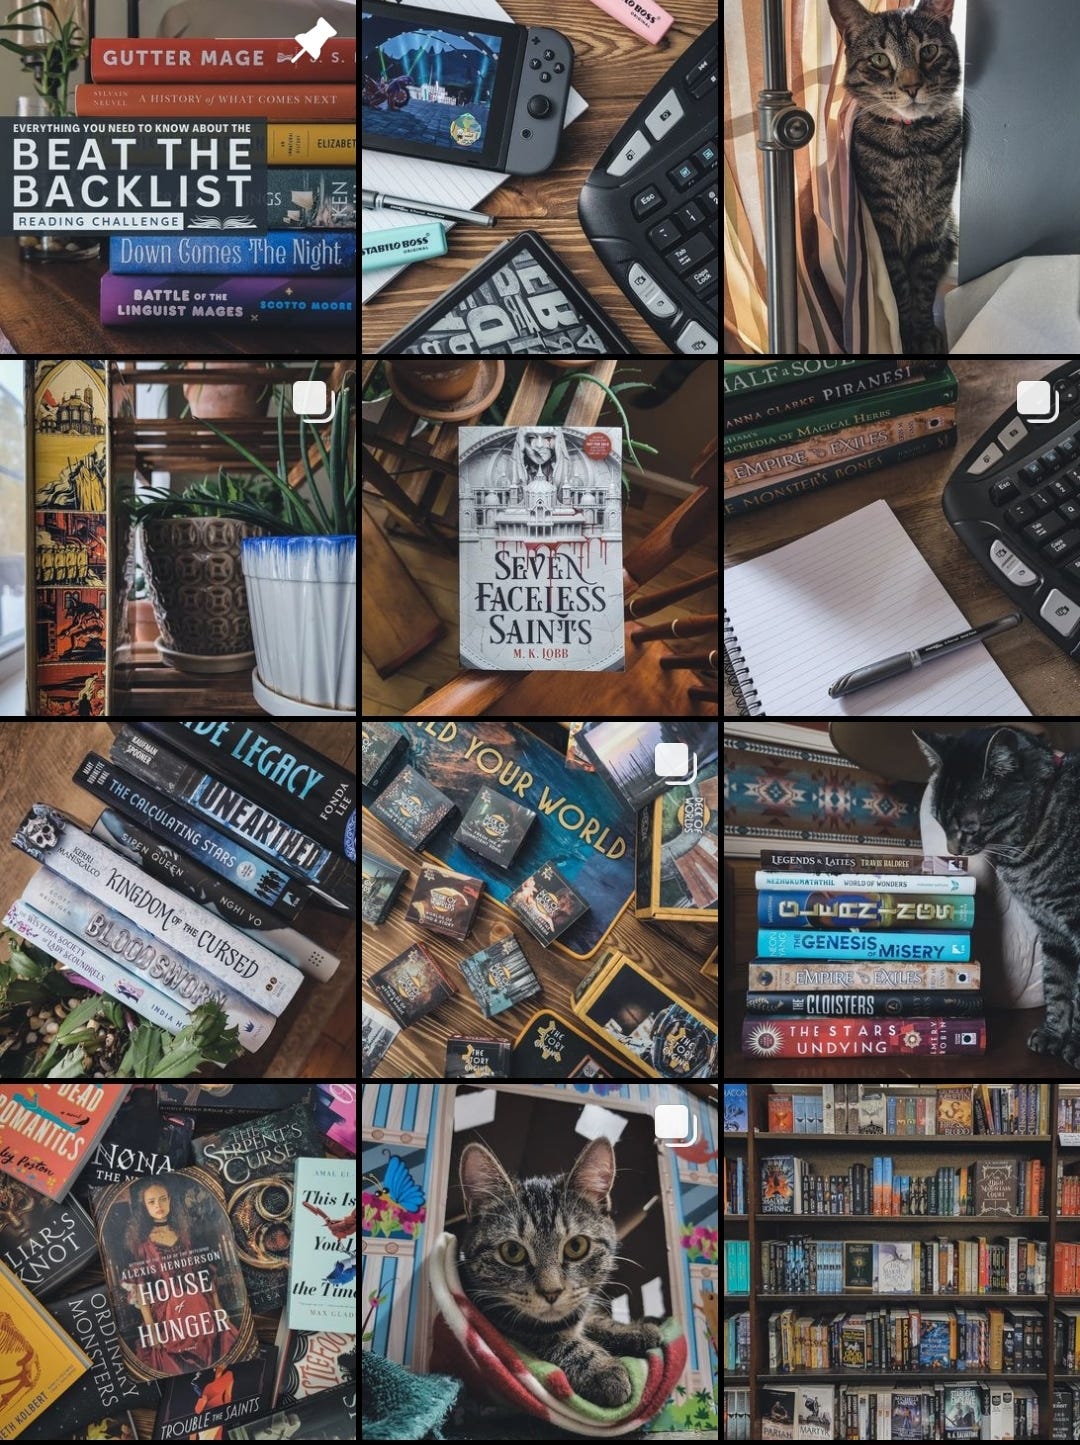 Instagram feed for the account @austinedecker featuring books, cats, and writing supplies with lots of wood tones.